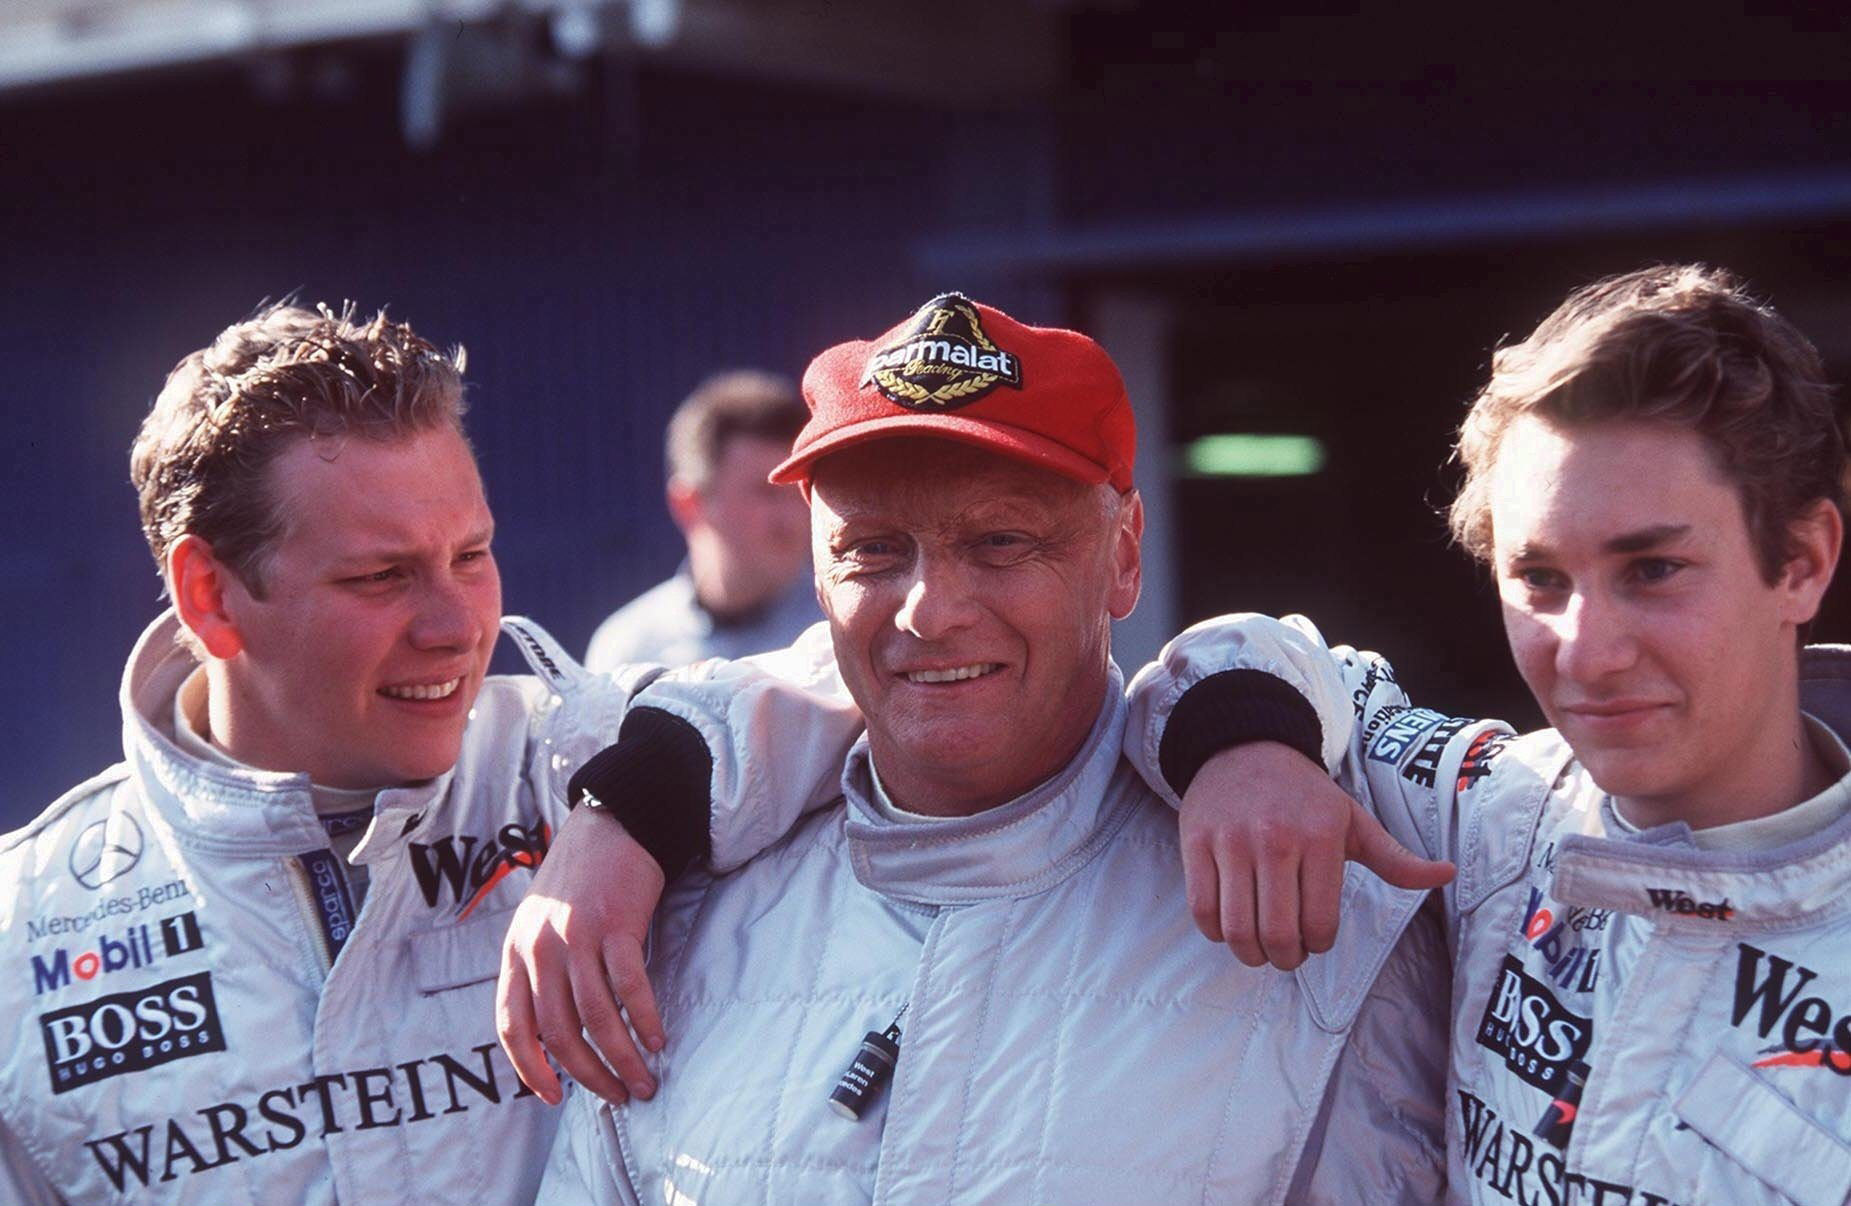 Lukas Lauda, his father Niki, and brother Mathias at the Circuit de Barcelona-Catalunya on February 7, 1999, in Spain. | Source: Getty Images